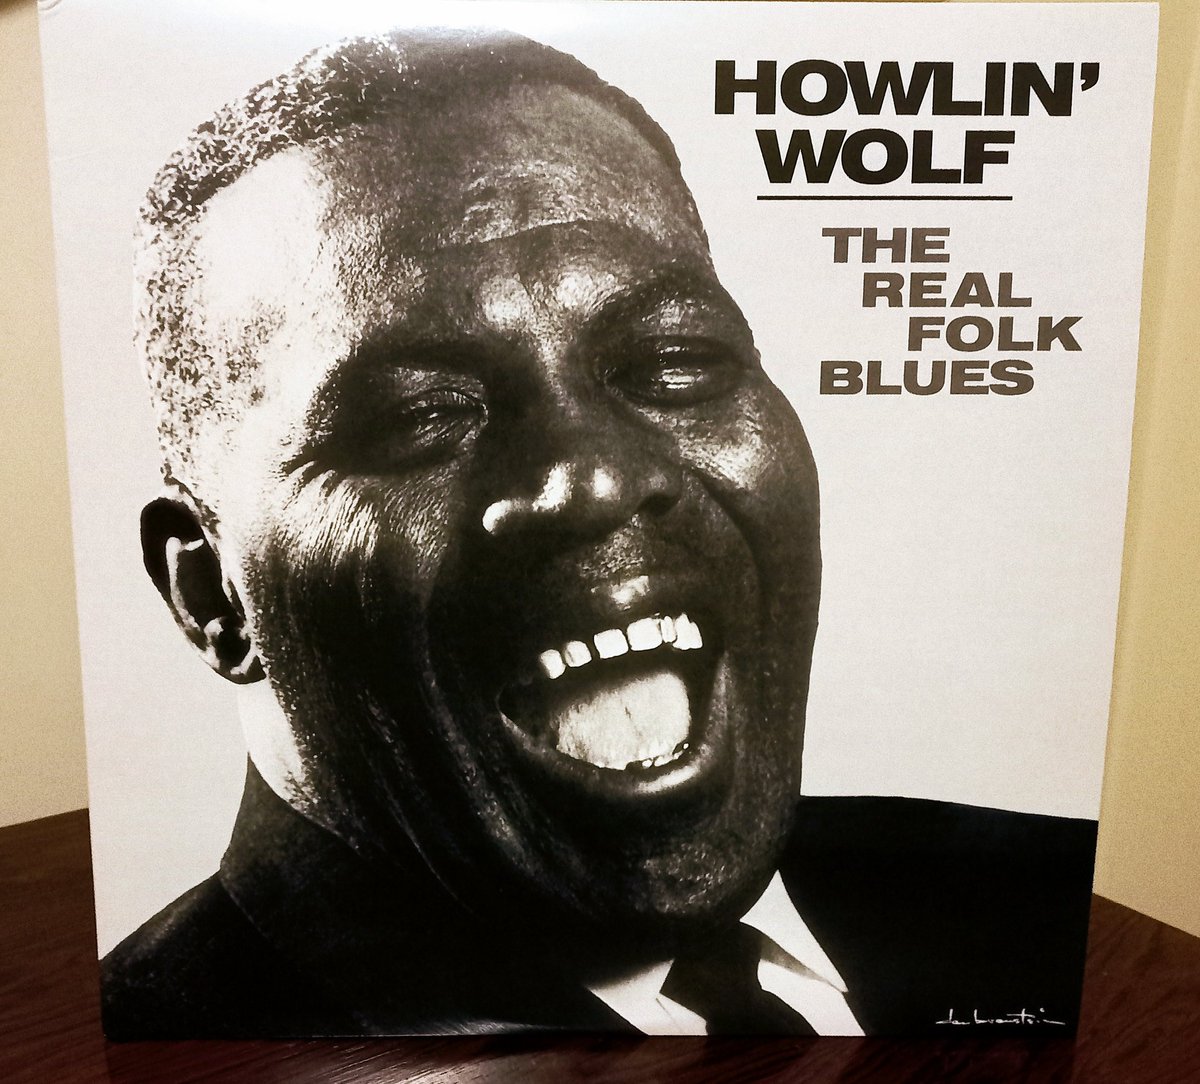 The Real Folk Blues is a compilation album by blues musician Howlin' Wolf, which was released by Chess Records in 1965.
#HowlinWolf
#Blues